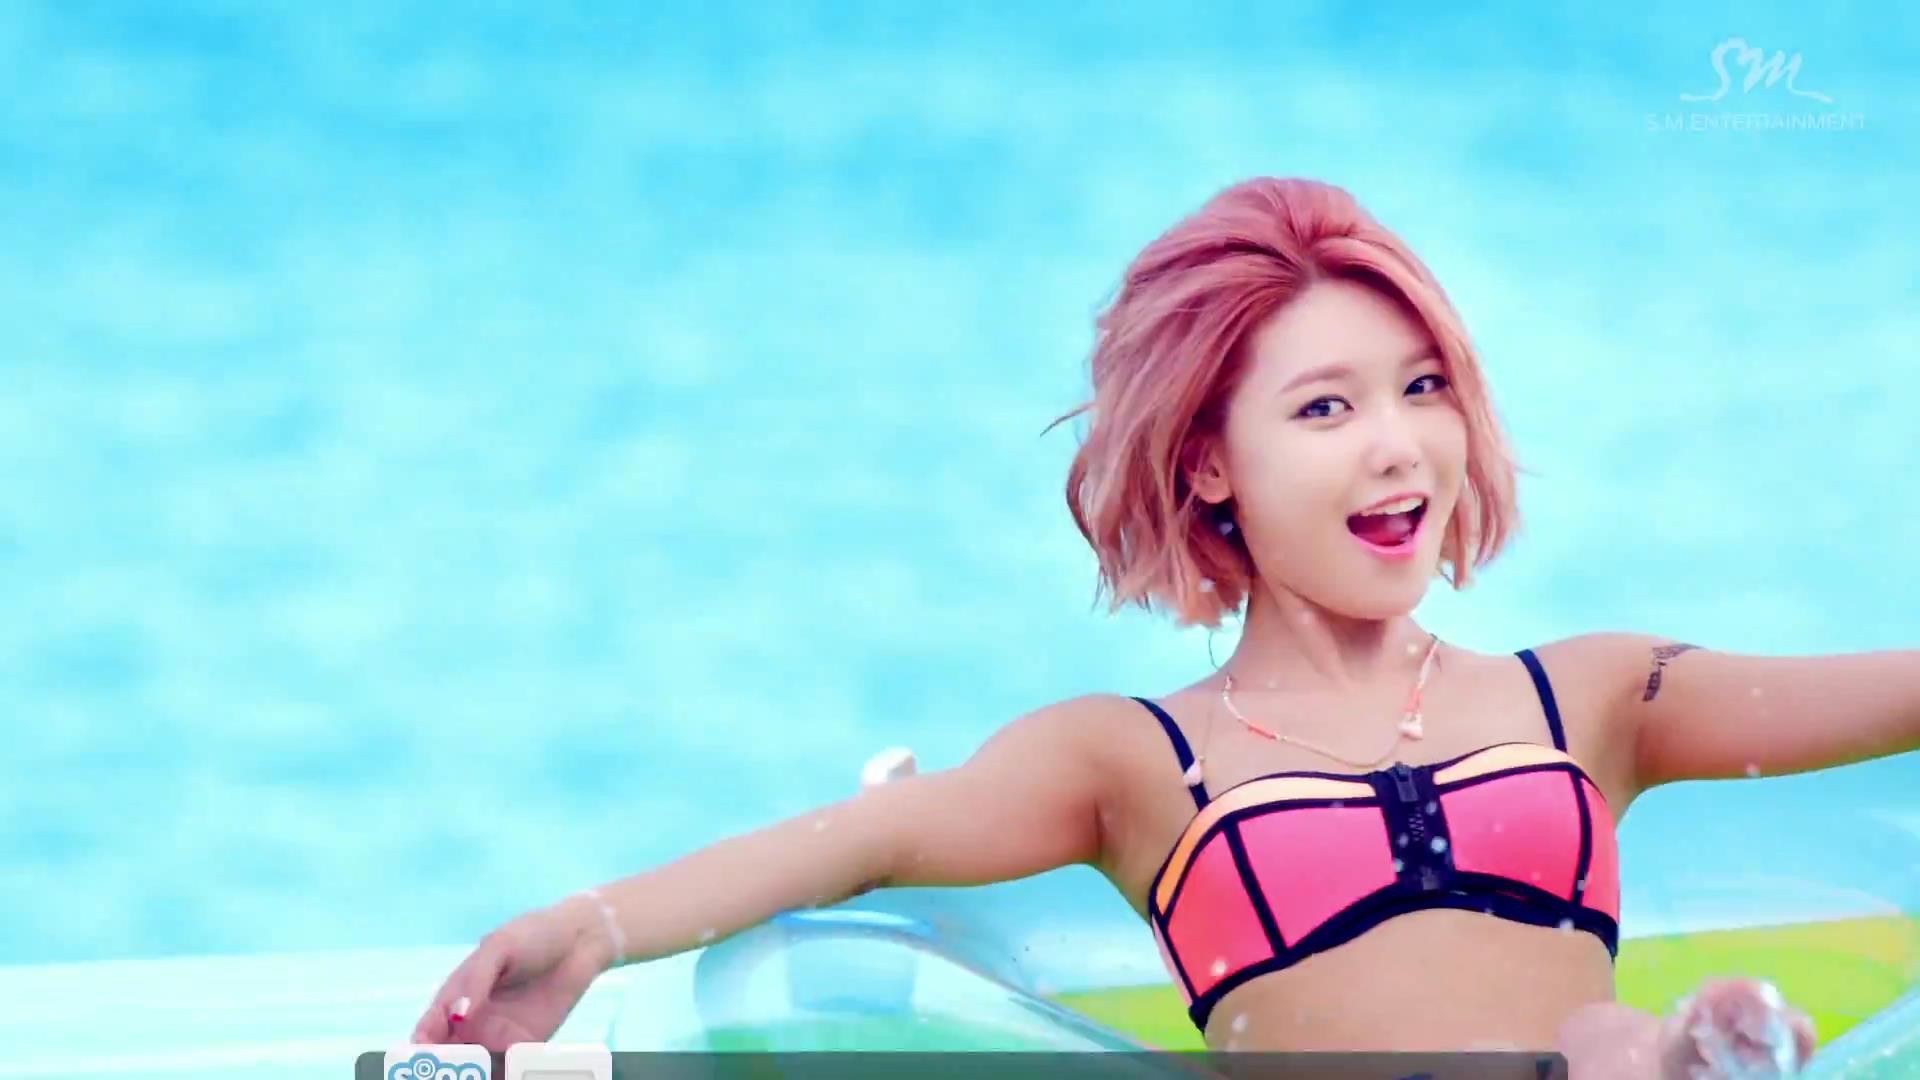 1920x1080 SNSD Sooyoung #PARTY!